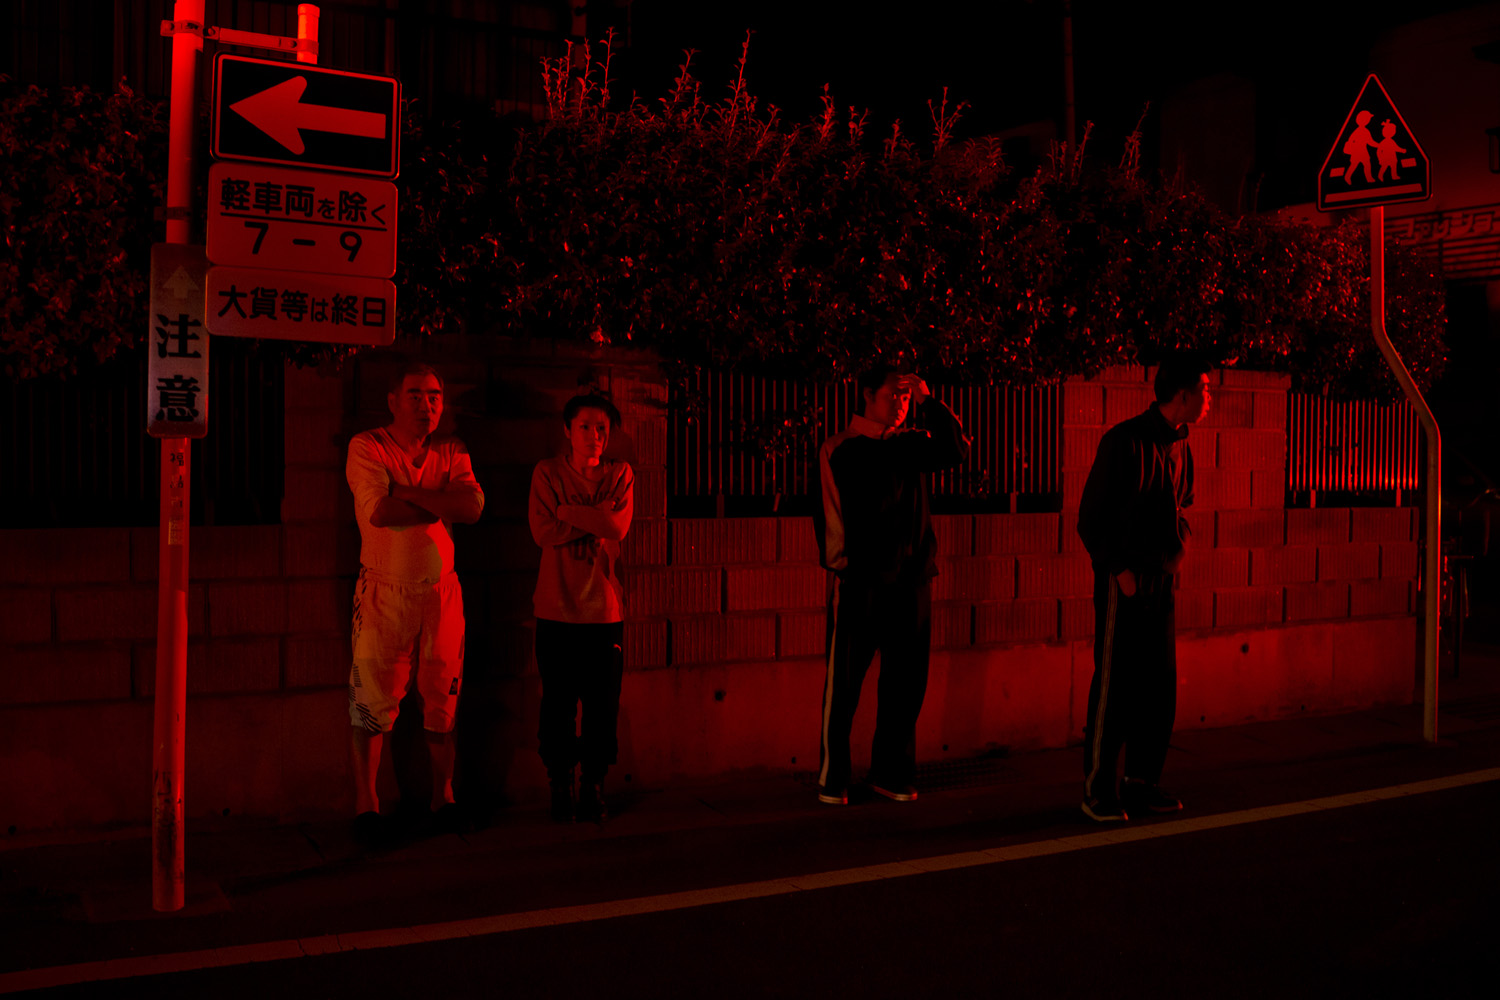 Japan, Fukushima City, 2014. Residents stand on the street while rescue teams try and break into a one bedroom apartment after a thirty year old decontamination worker locked himself into his apartment and committed suicide by deliberately breathing in carbon monoxide. Suicides in Fukushima have been on the rise since the nuclear disaster.